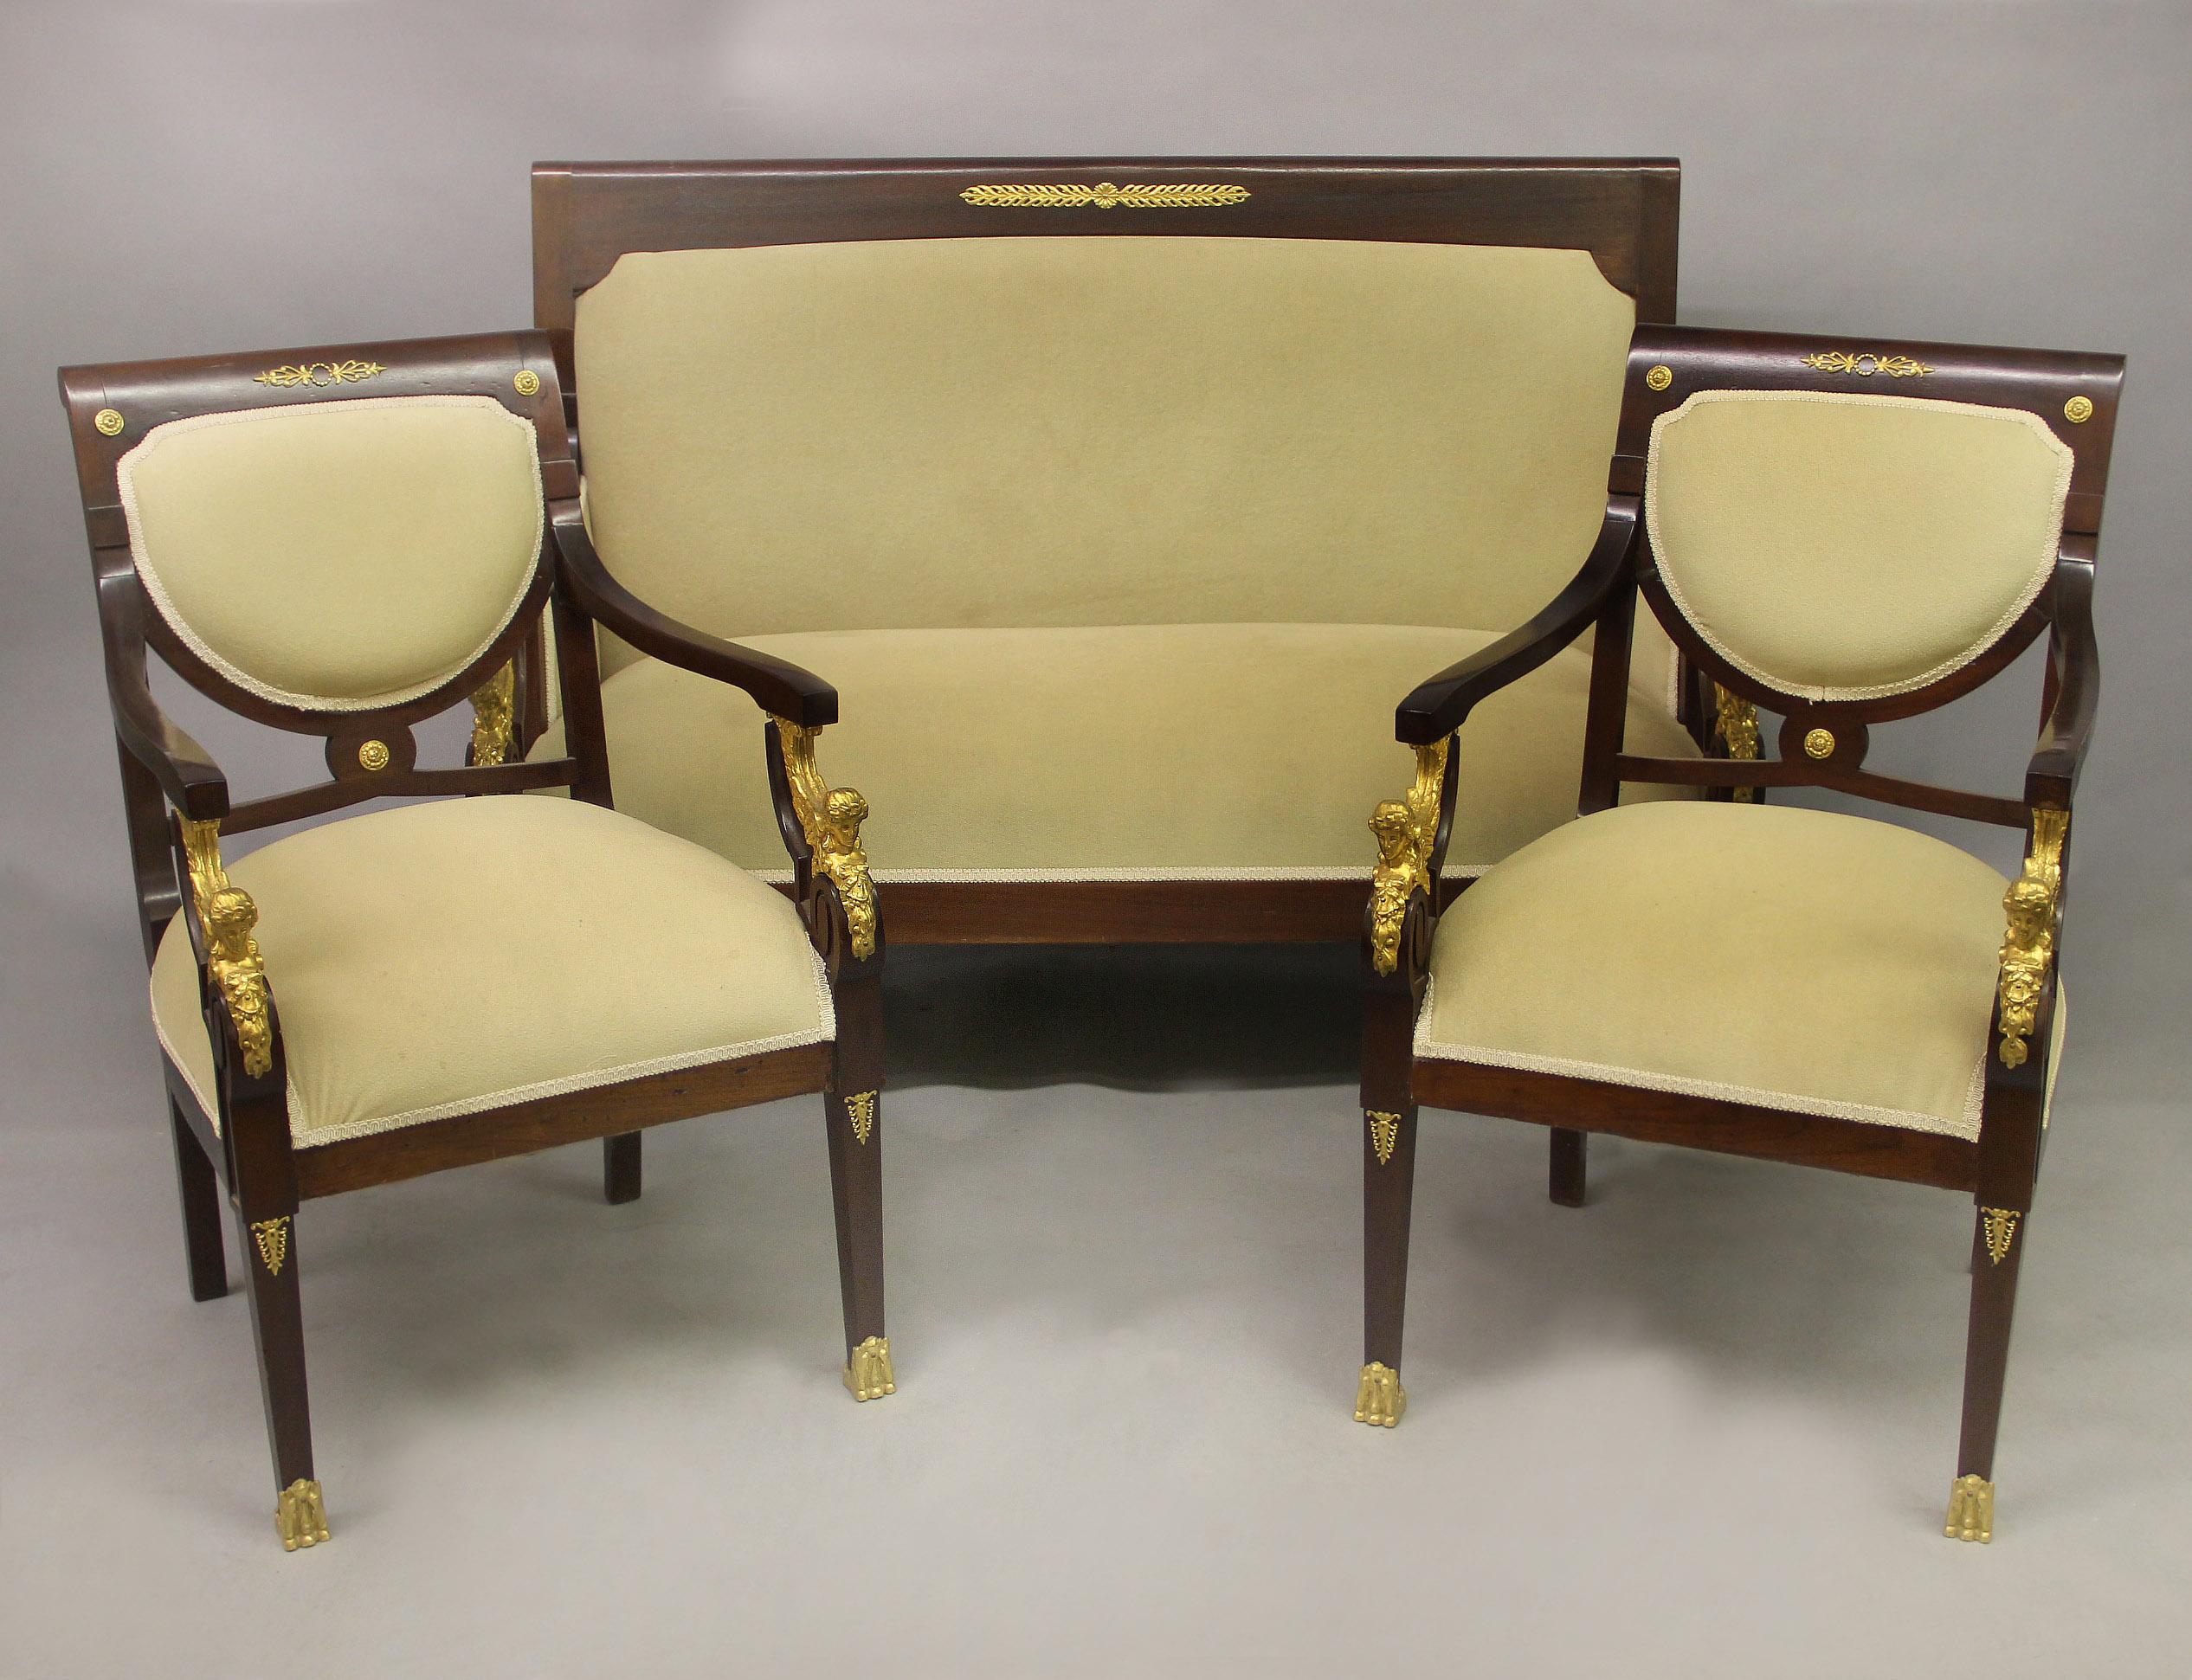 A nice late 19th / early 20th century gilt bronze mounted empire style three piece parlor set.

Comprising of a settee and a pair of armchairs.

The rectangular backs leading to wavy arms, each supported by gilt bronze female sphinx with spread